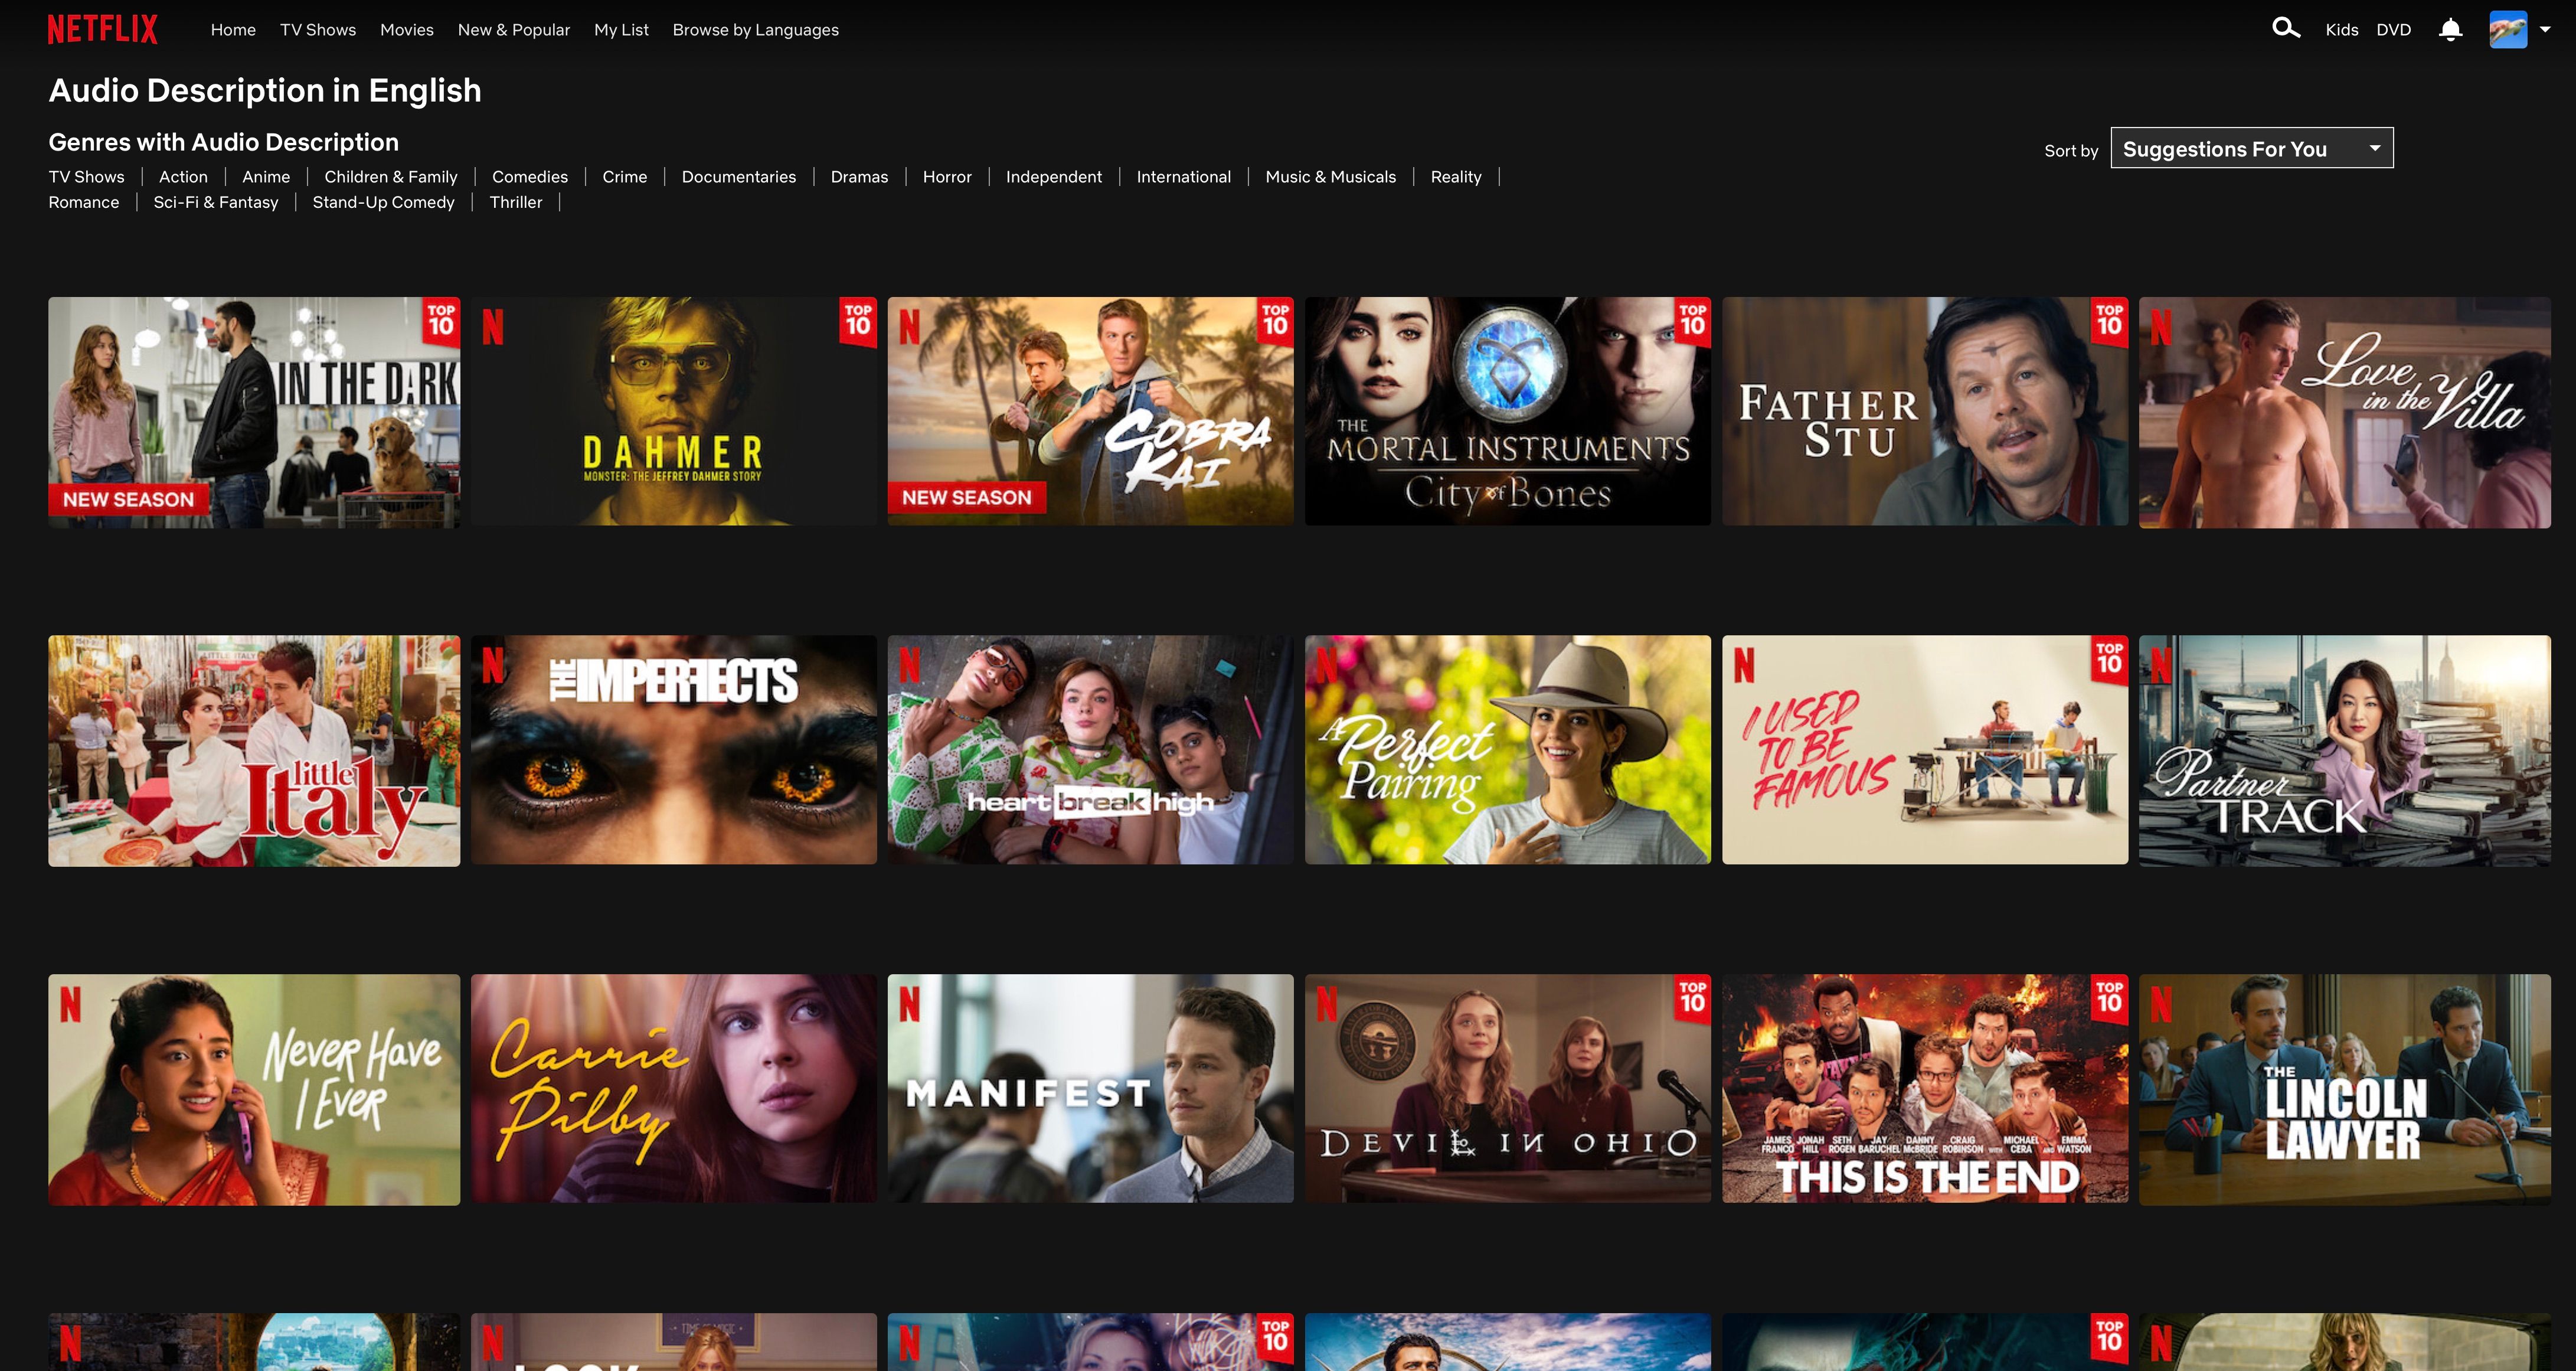 Netflix Audio Description Content Page with genres and titles listed